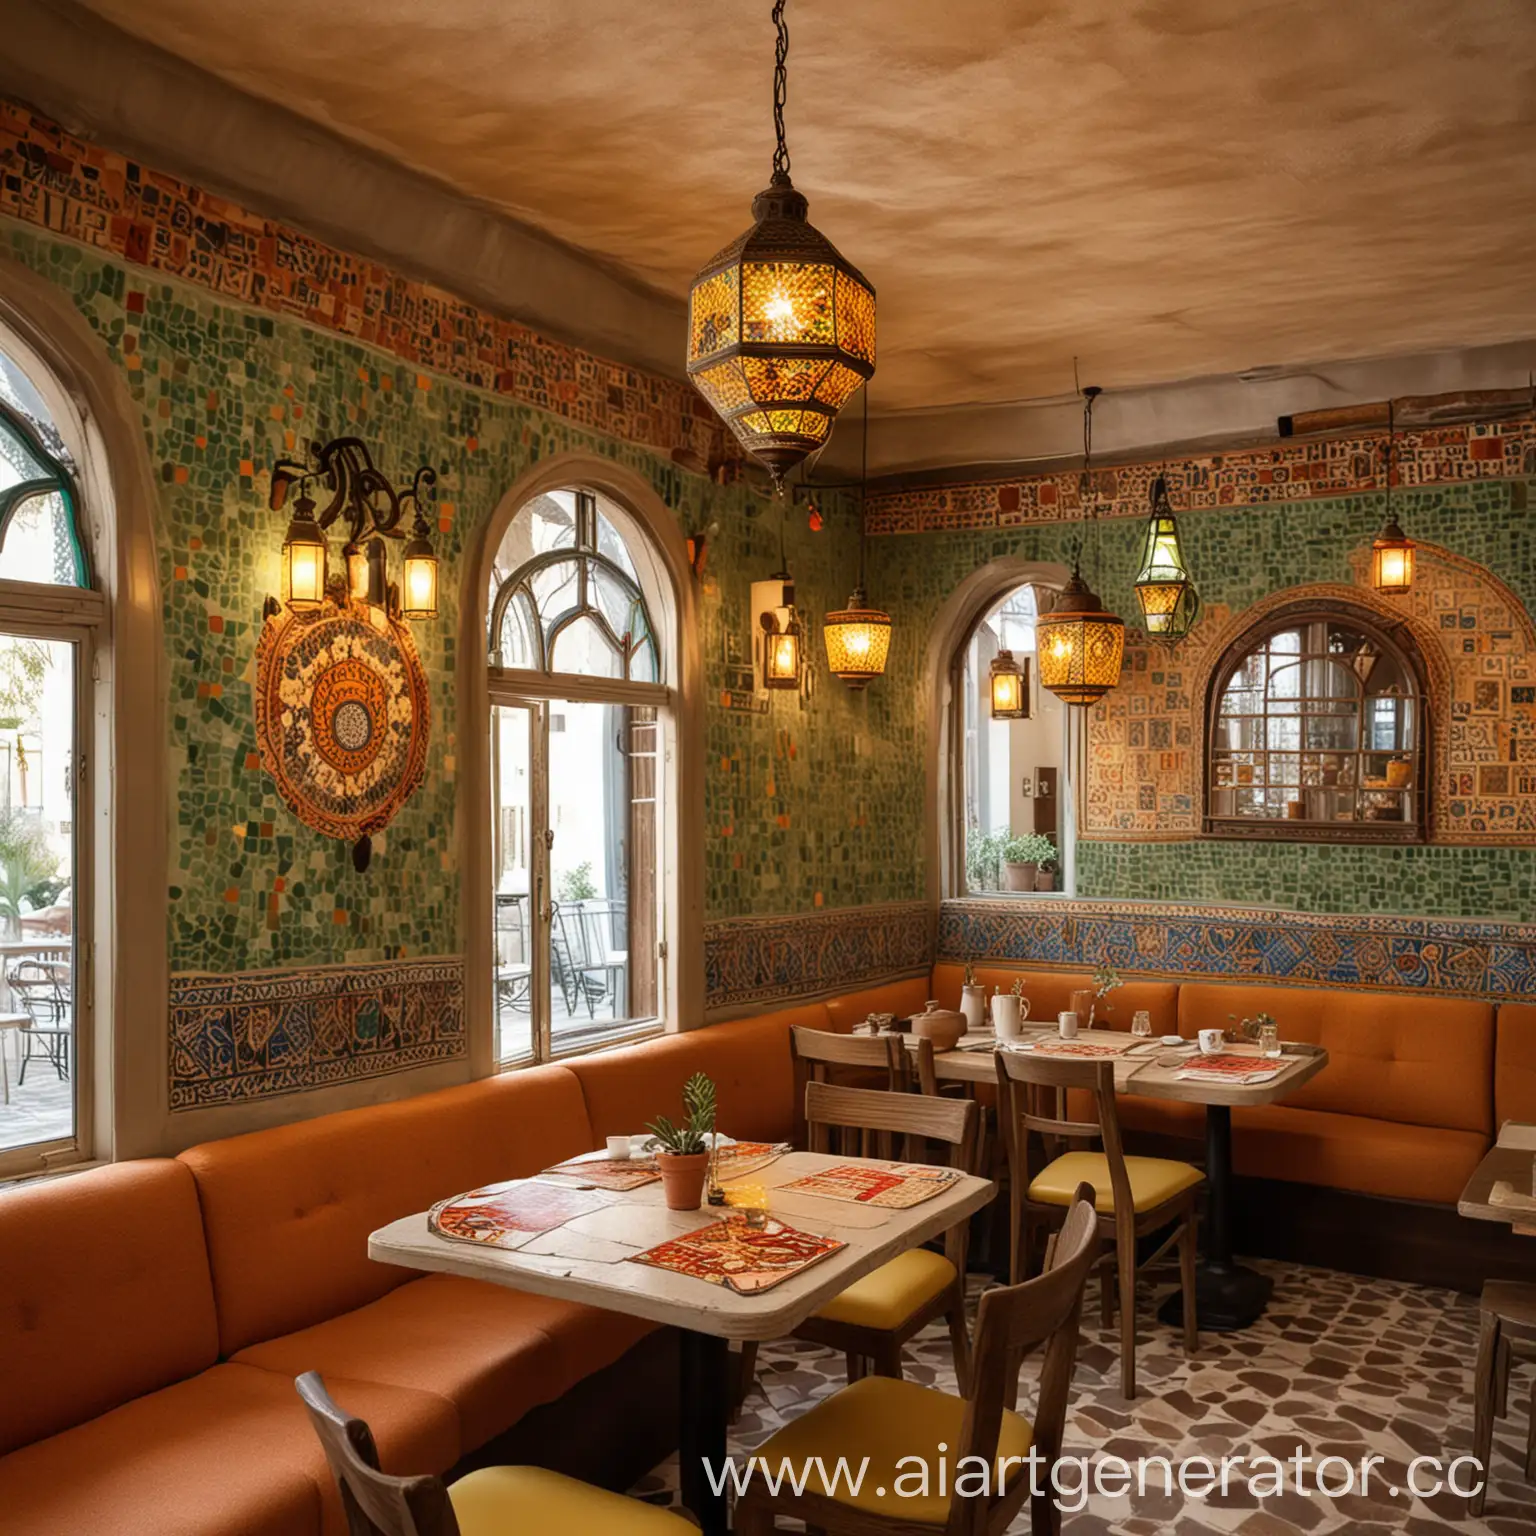 Modern-Israeli-Cafe-Interior-Design-with-Traditional-Motifs